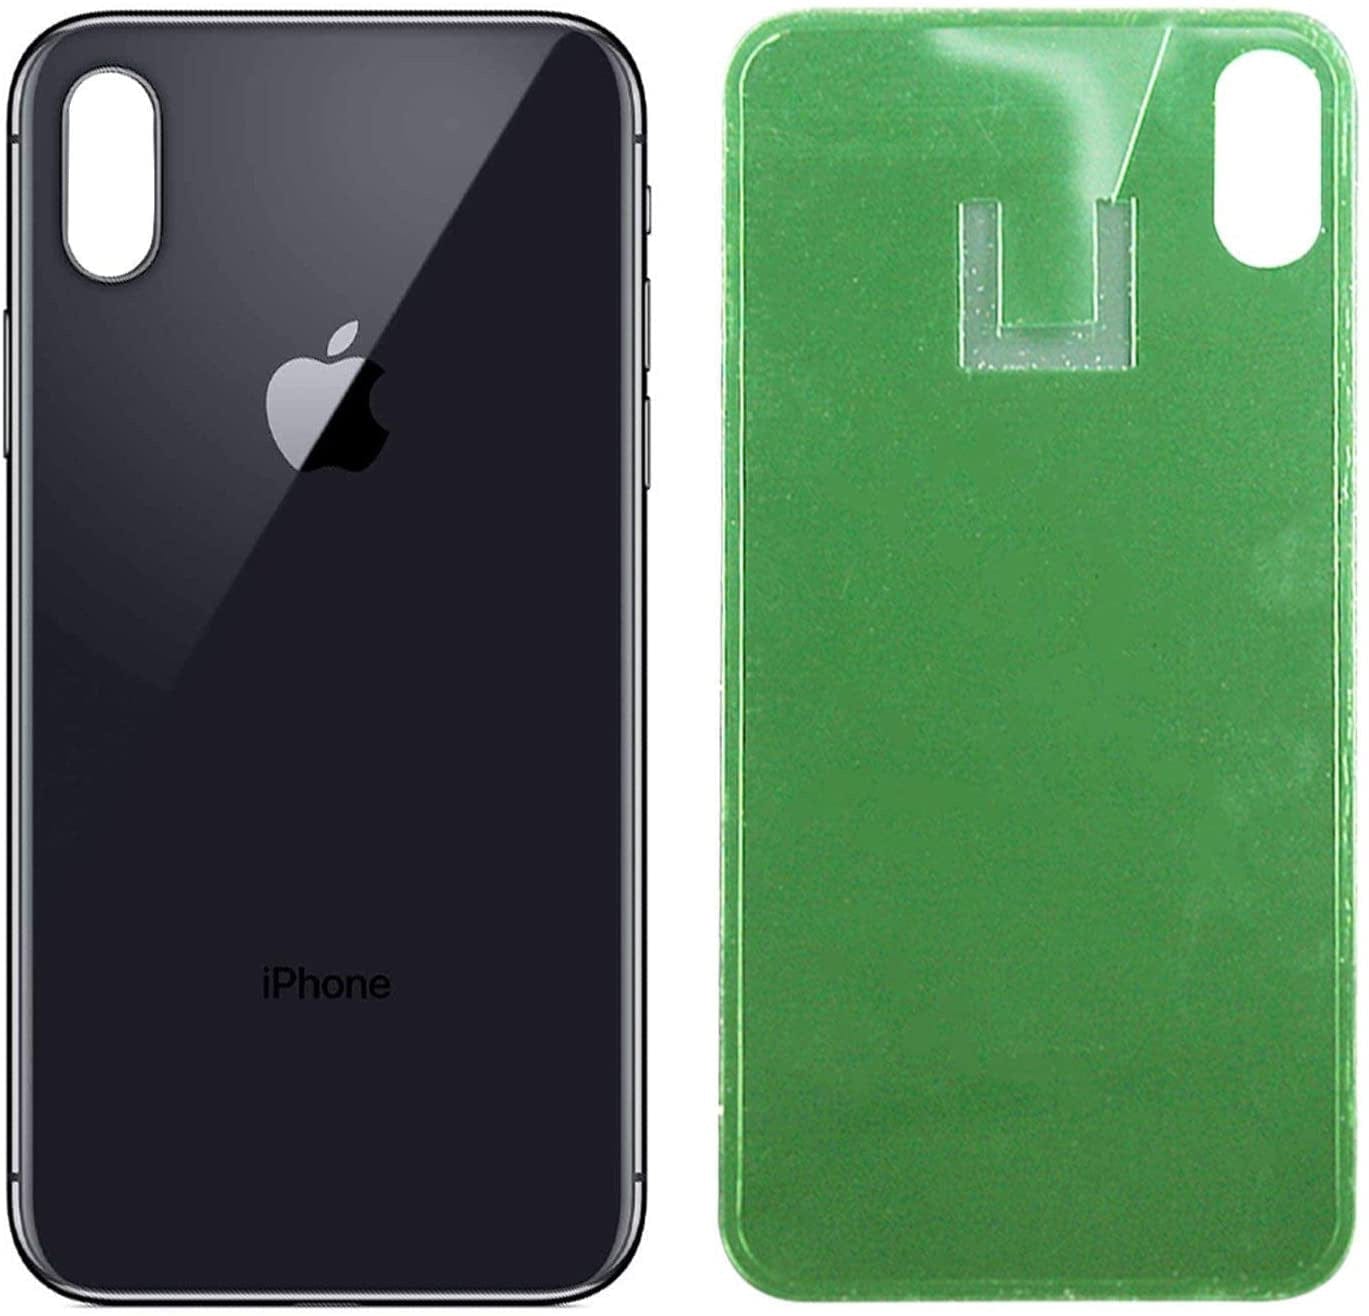 iPhone X Back Glass Replacement Black Color